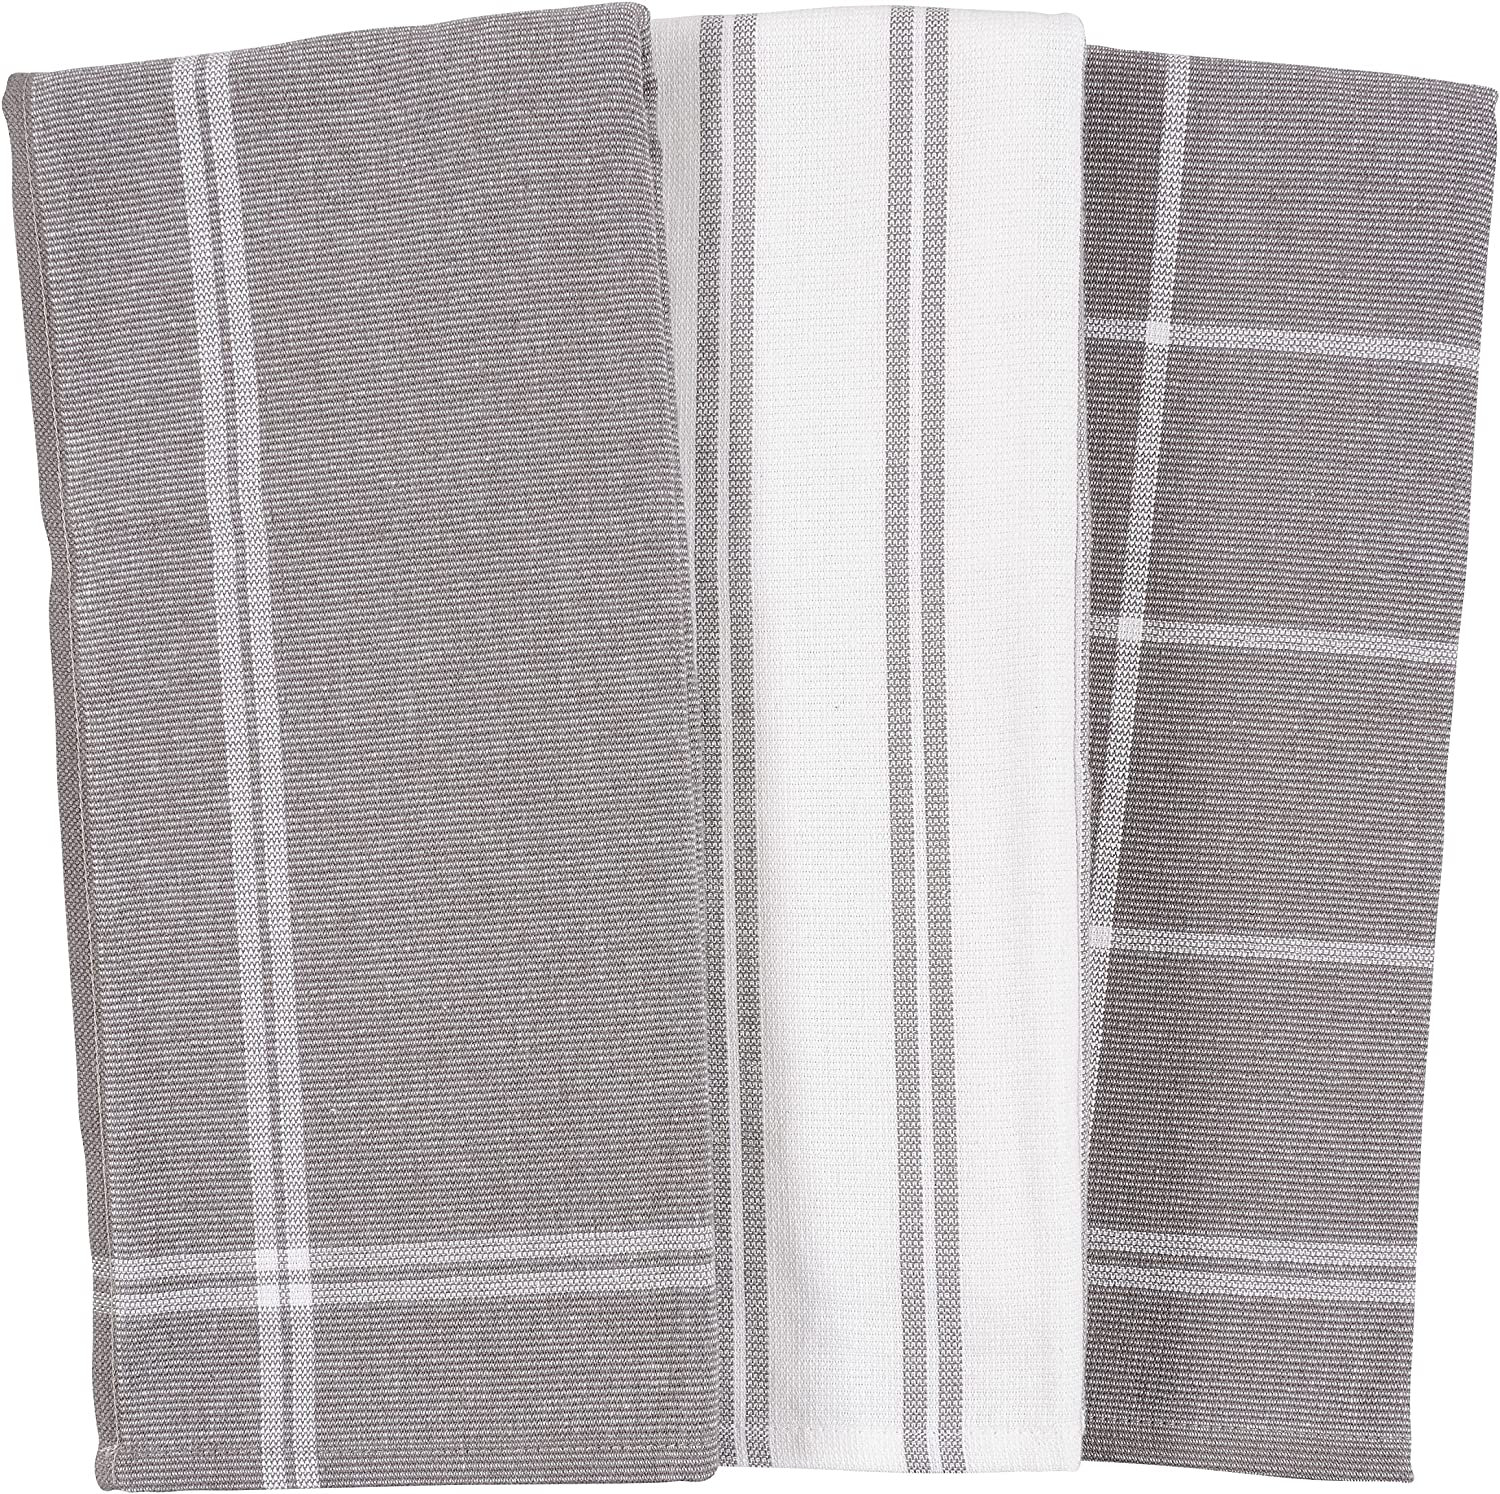 Ruvanti 12 Pack 100% Cotton 15x29 inch Kitchen Towels, Dish Towels for  Kitchen, Soft, Washable, Super Absorbent Waffle Weave Tea Towels Linen